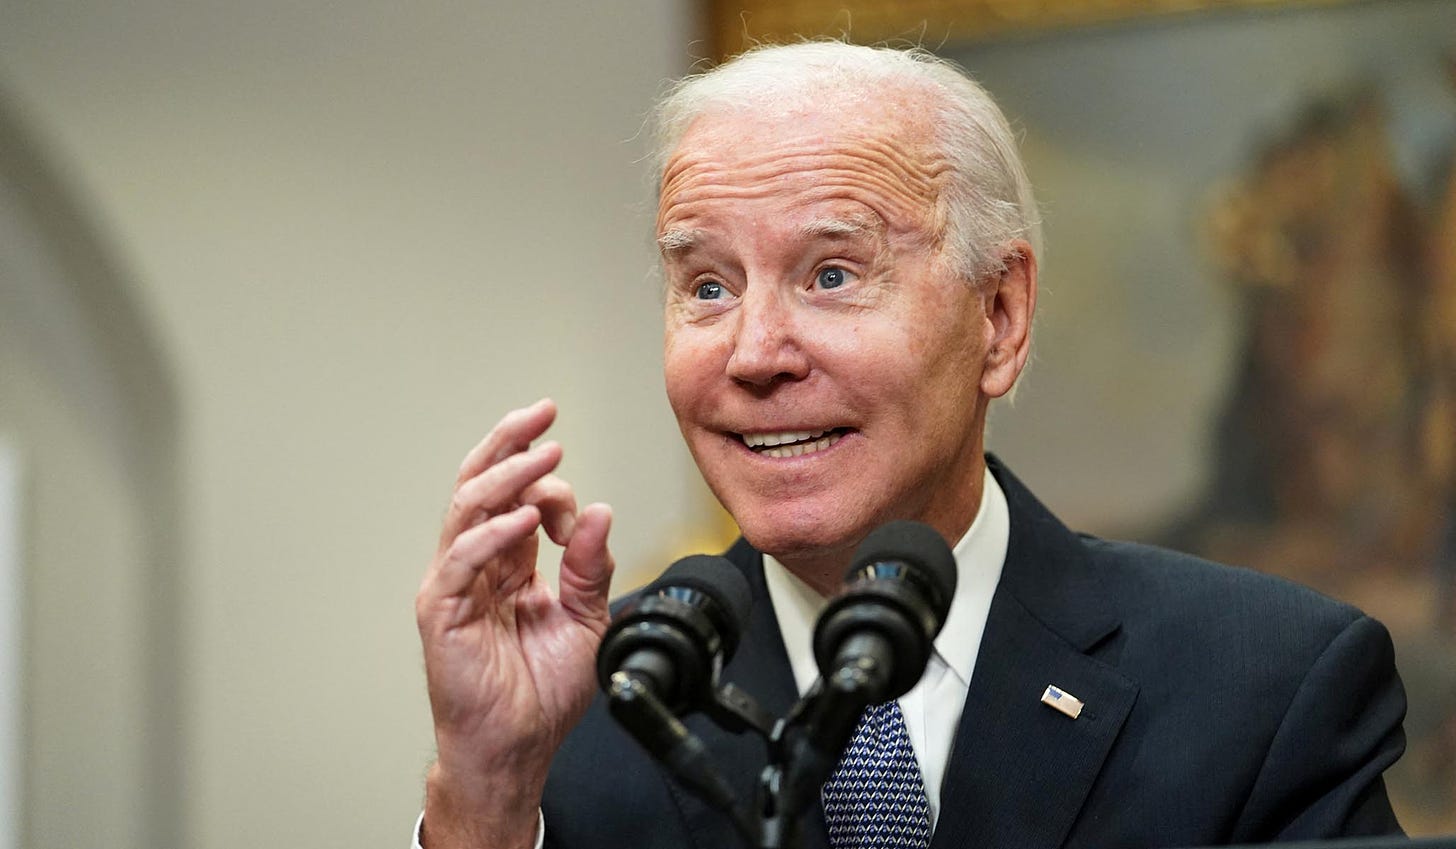 Is Biden Senile or a Pathological Liar? | National Review